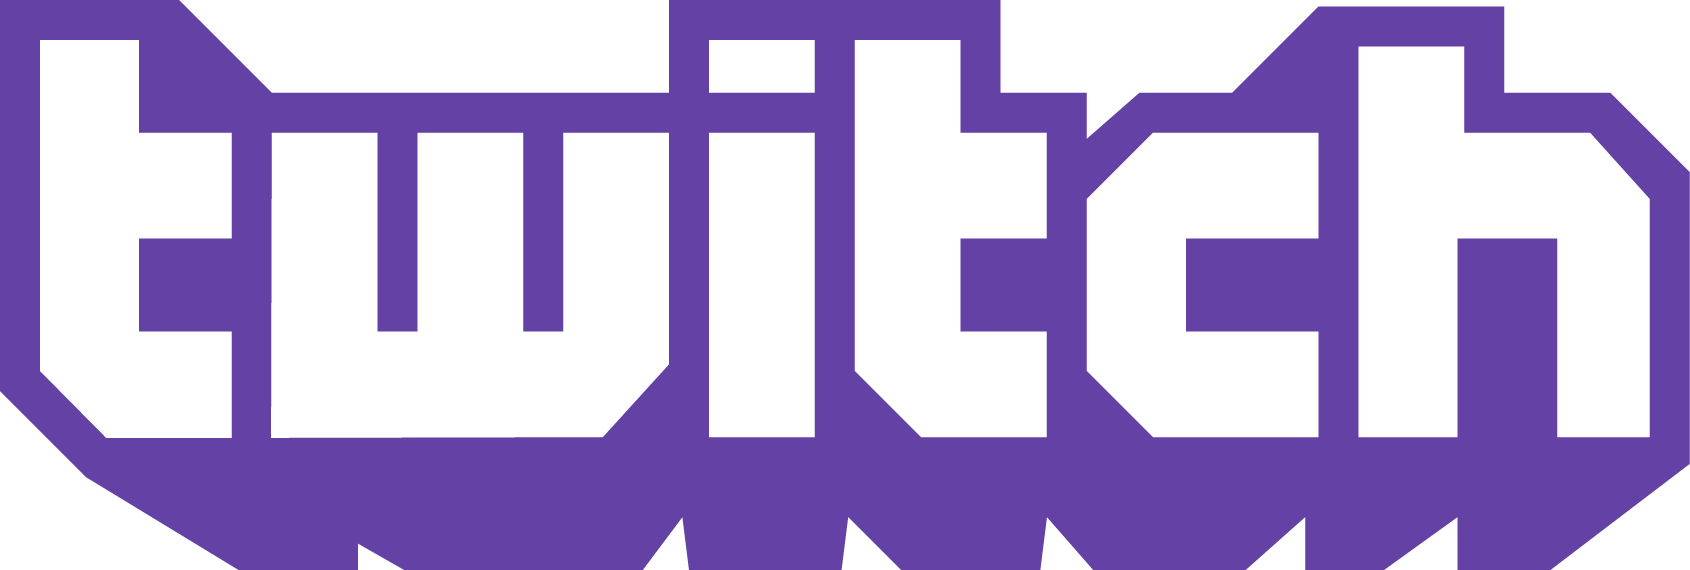 Twitch Logo - Twitch Eps, Transparent background PNG HD thumbnail